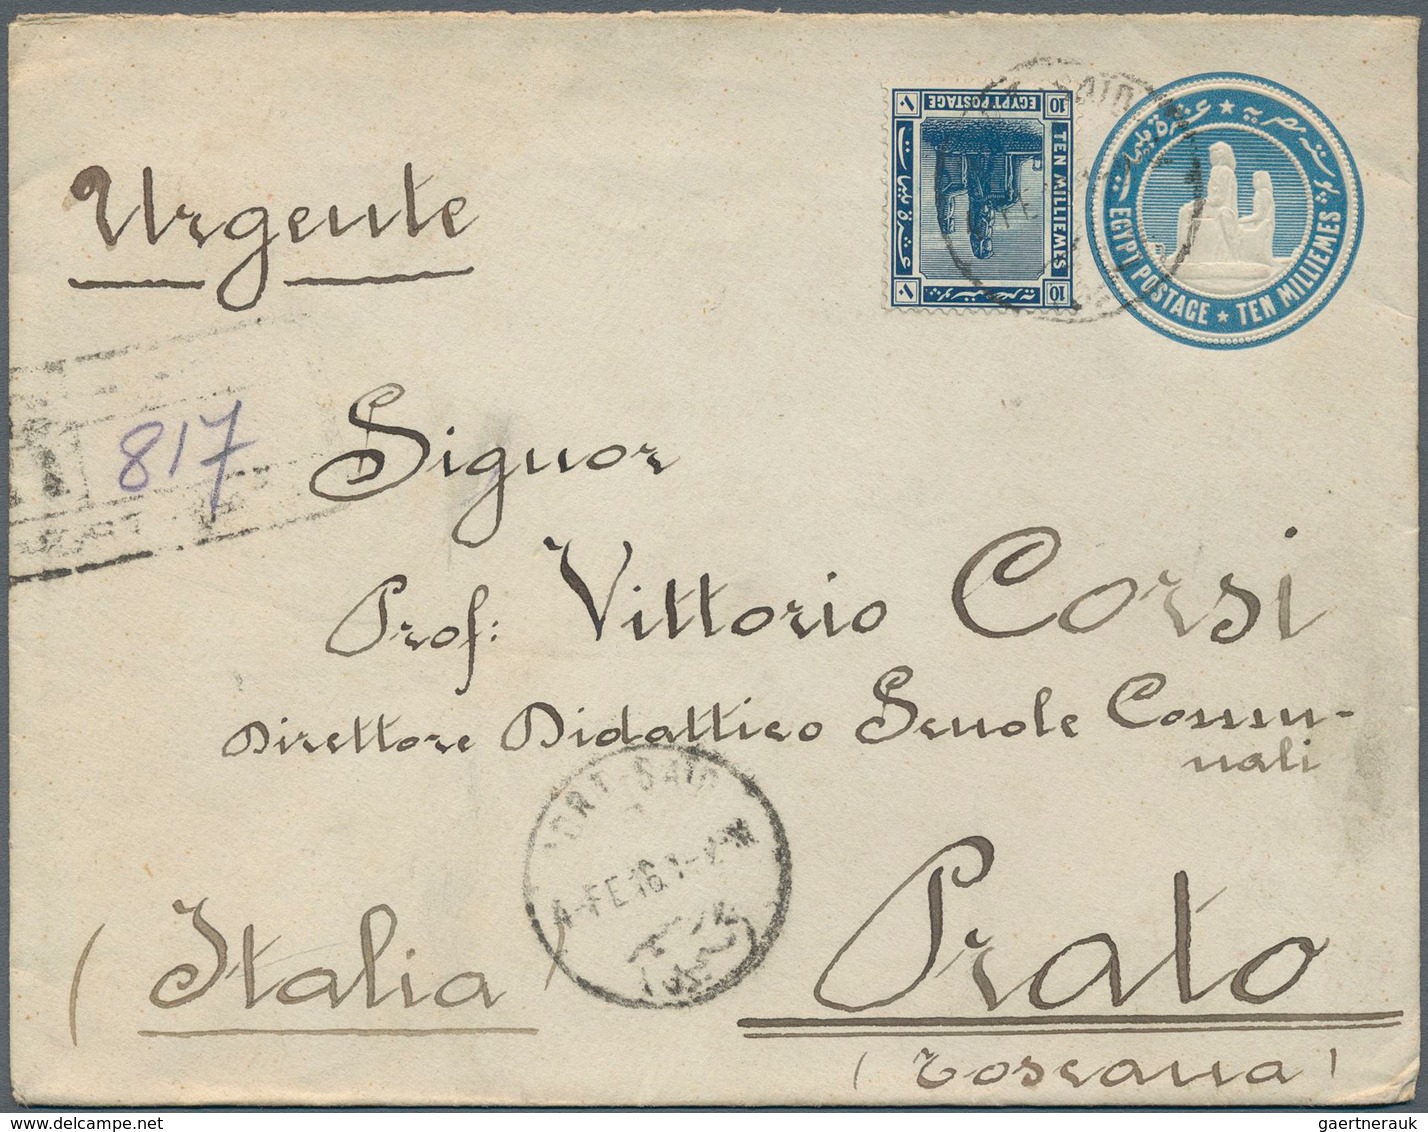 Ägypten - Ganzsachen: 1879-1945: Collection of 45 postal stationery items, all used postally, with p